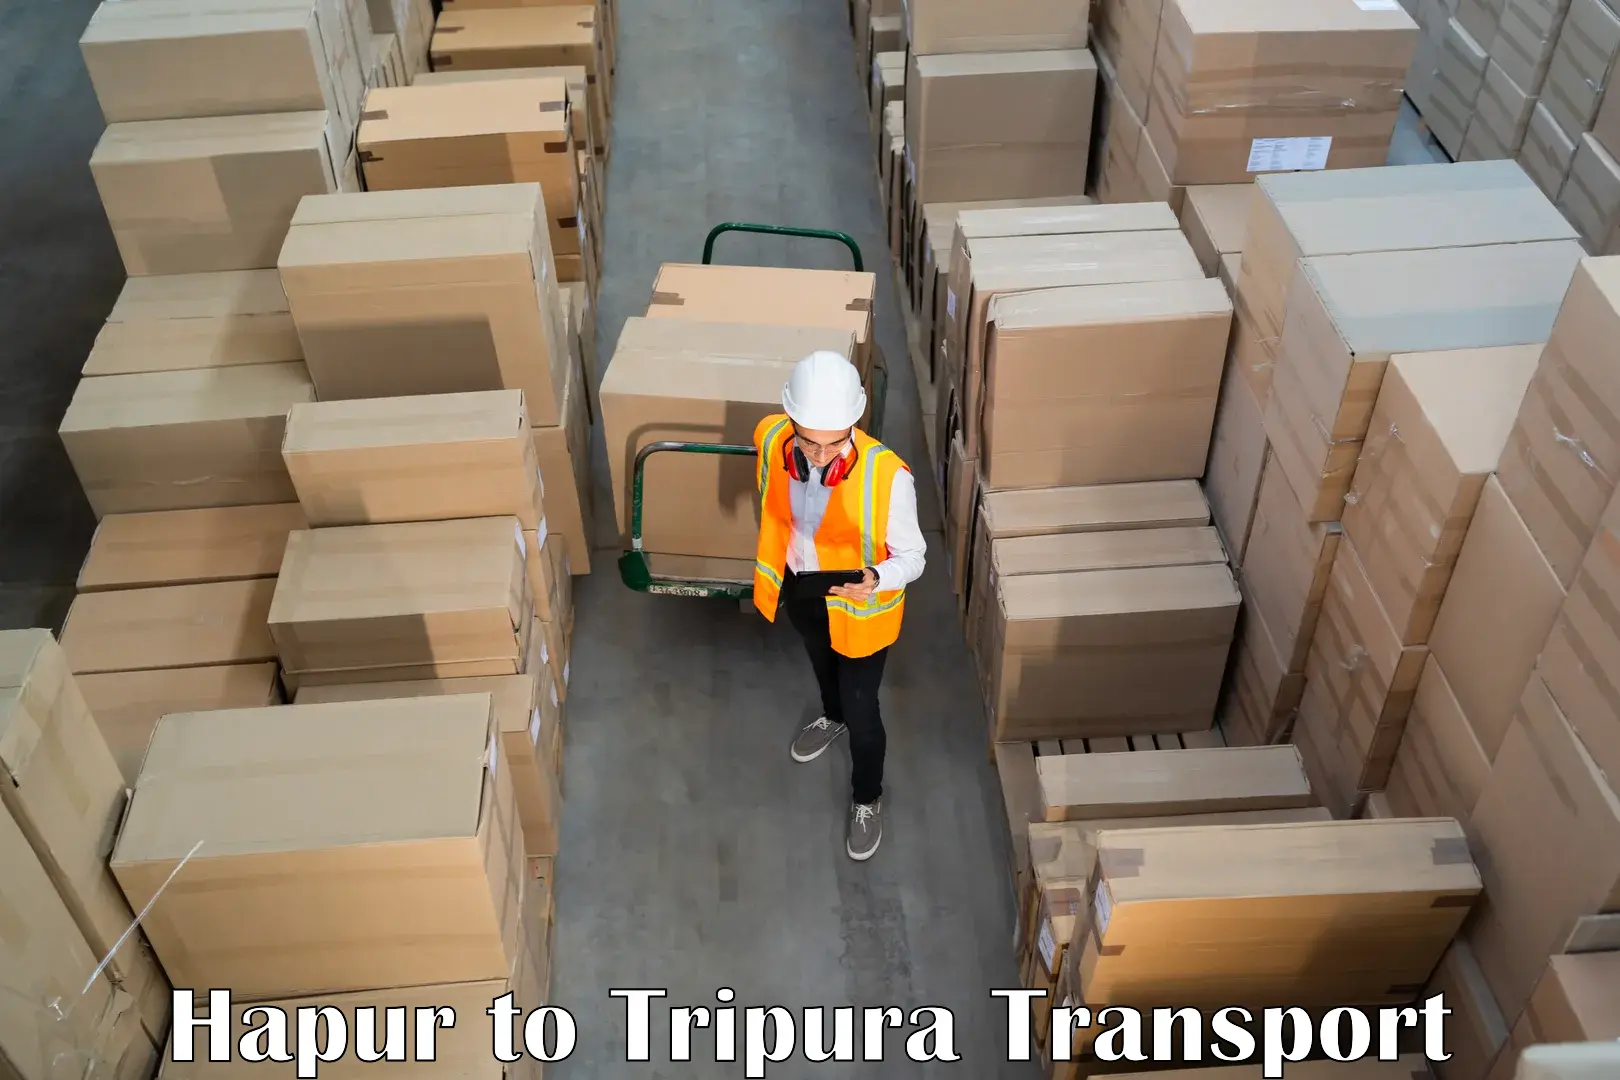 Commercial transport service Hapur to Tripura